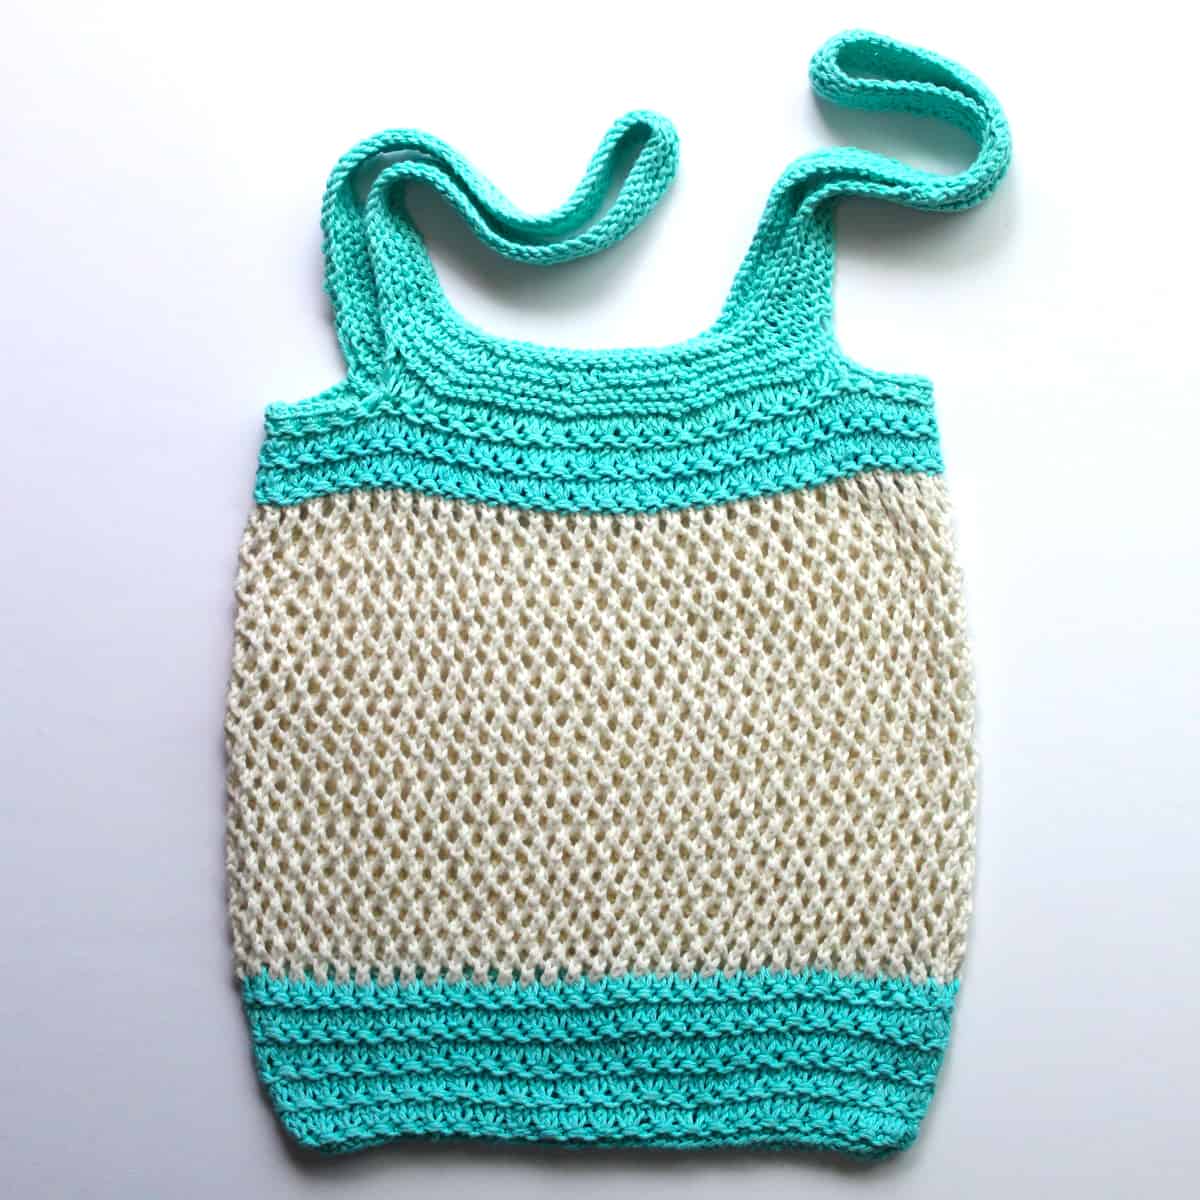 Small Size Market Bag in seabreeze blue and cream cotton yarn colors.